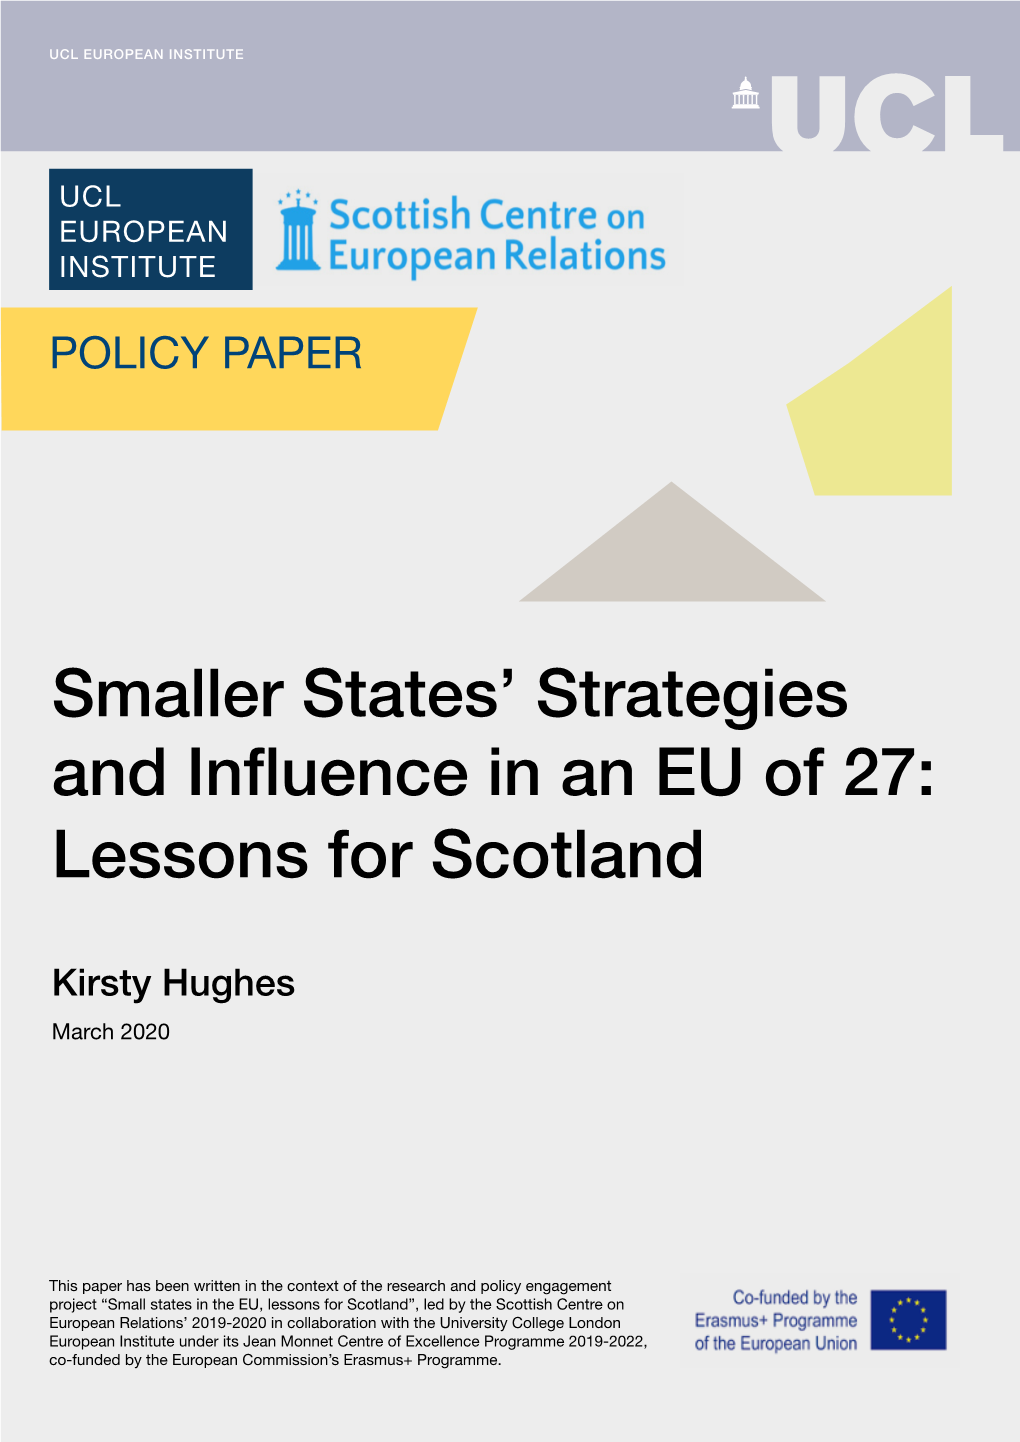 Smaller States' Strategies and Influence in an EU of 27: Lessons for Scotland